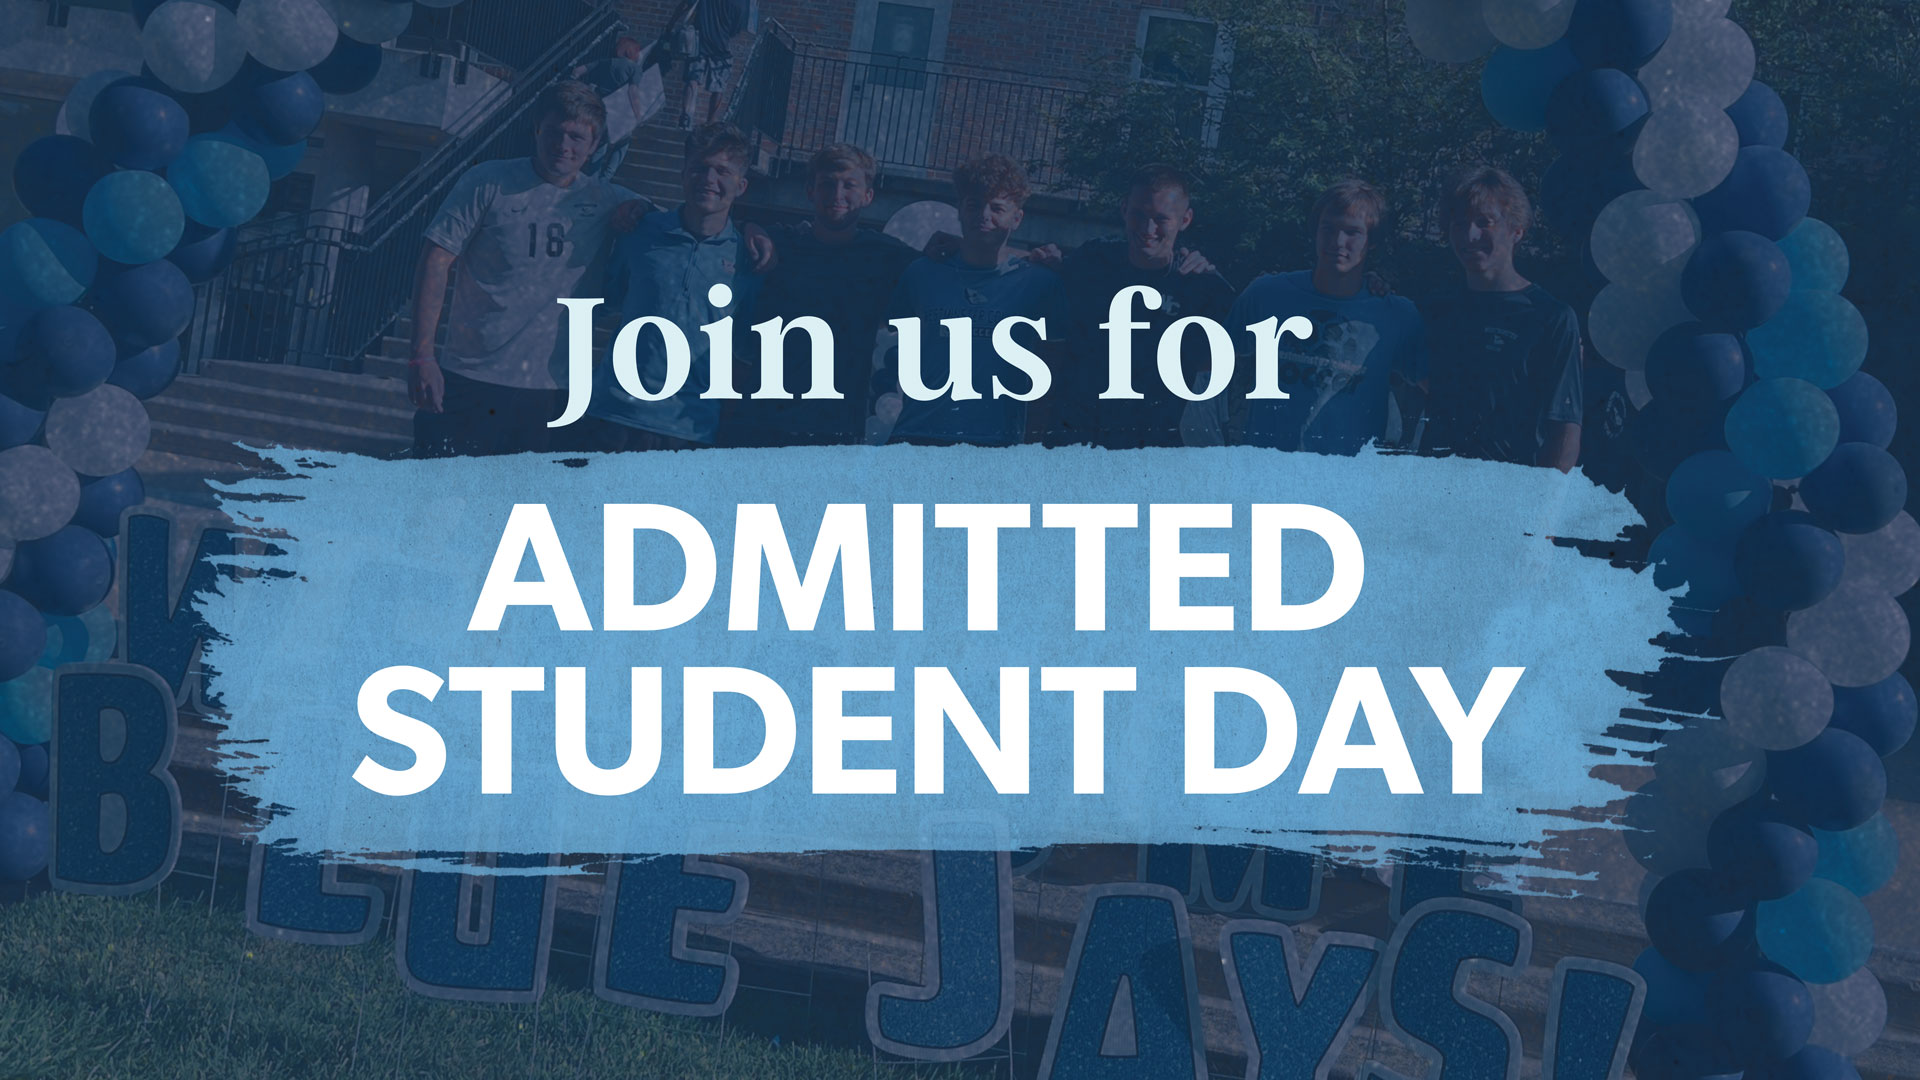 Text which states: Join us for Admitted Student Day